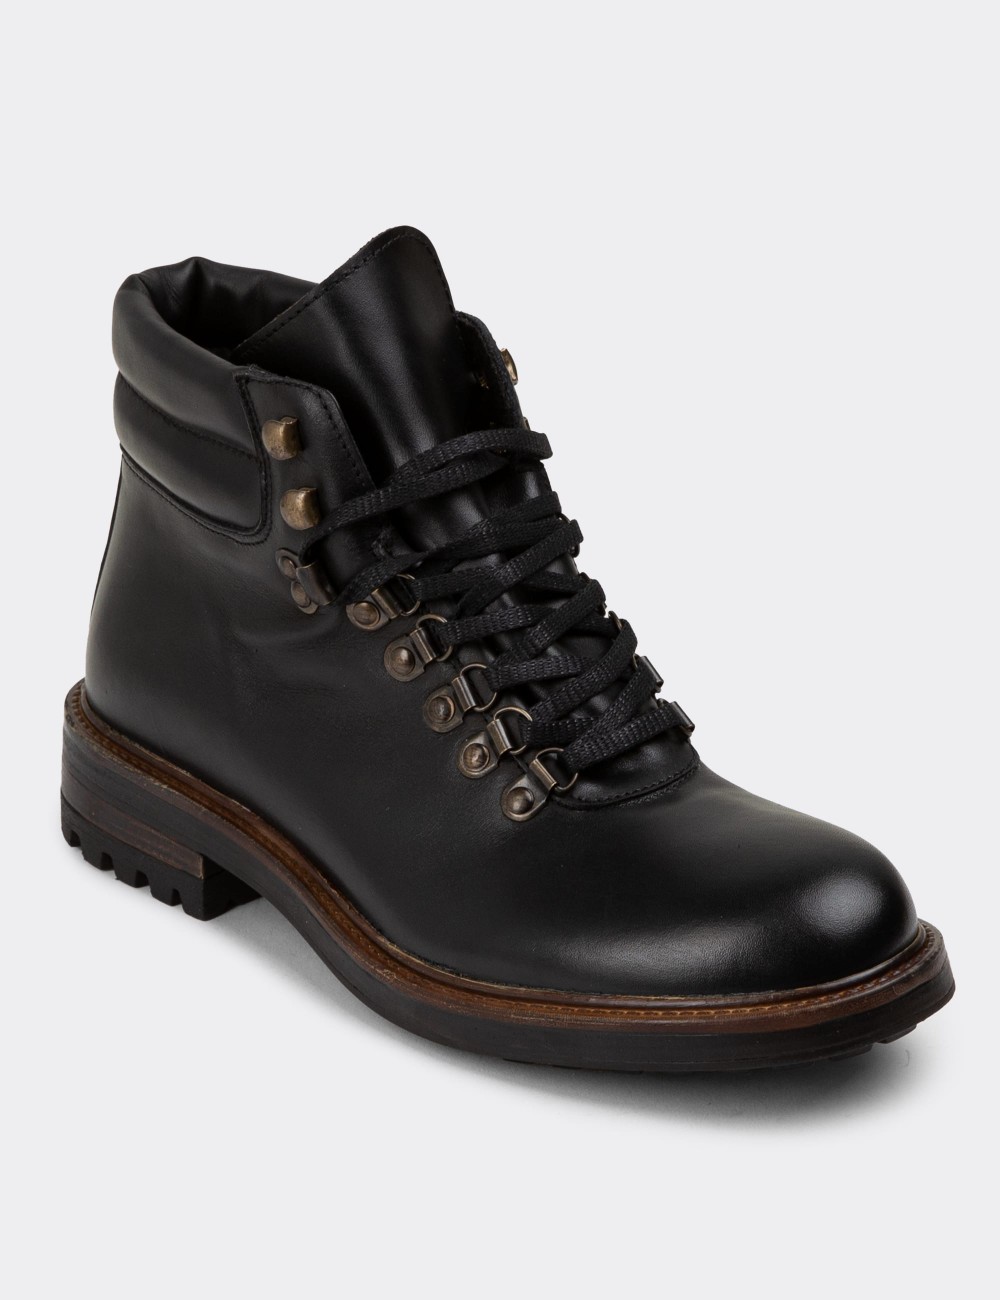 Black Leather Boots - 01923MSYHC01